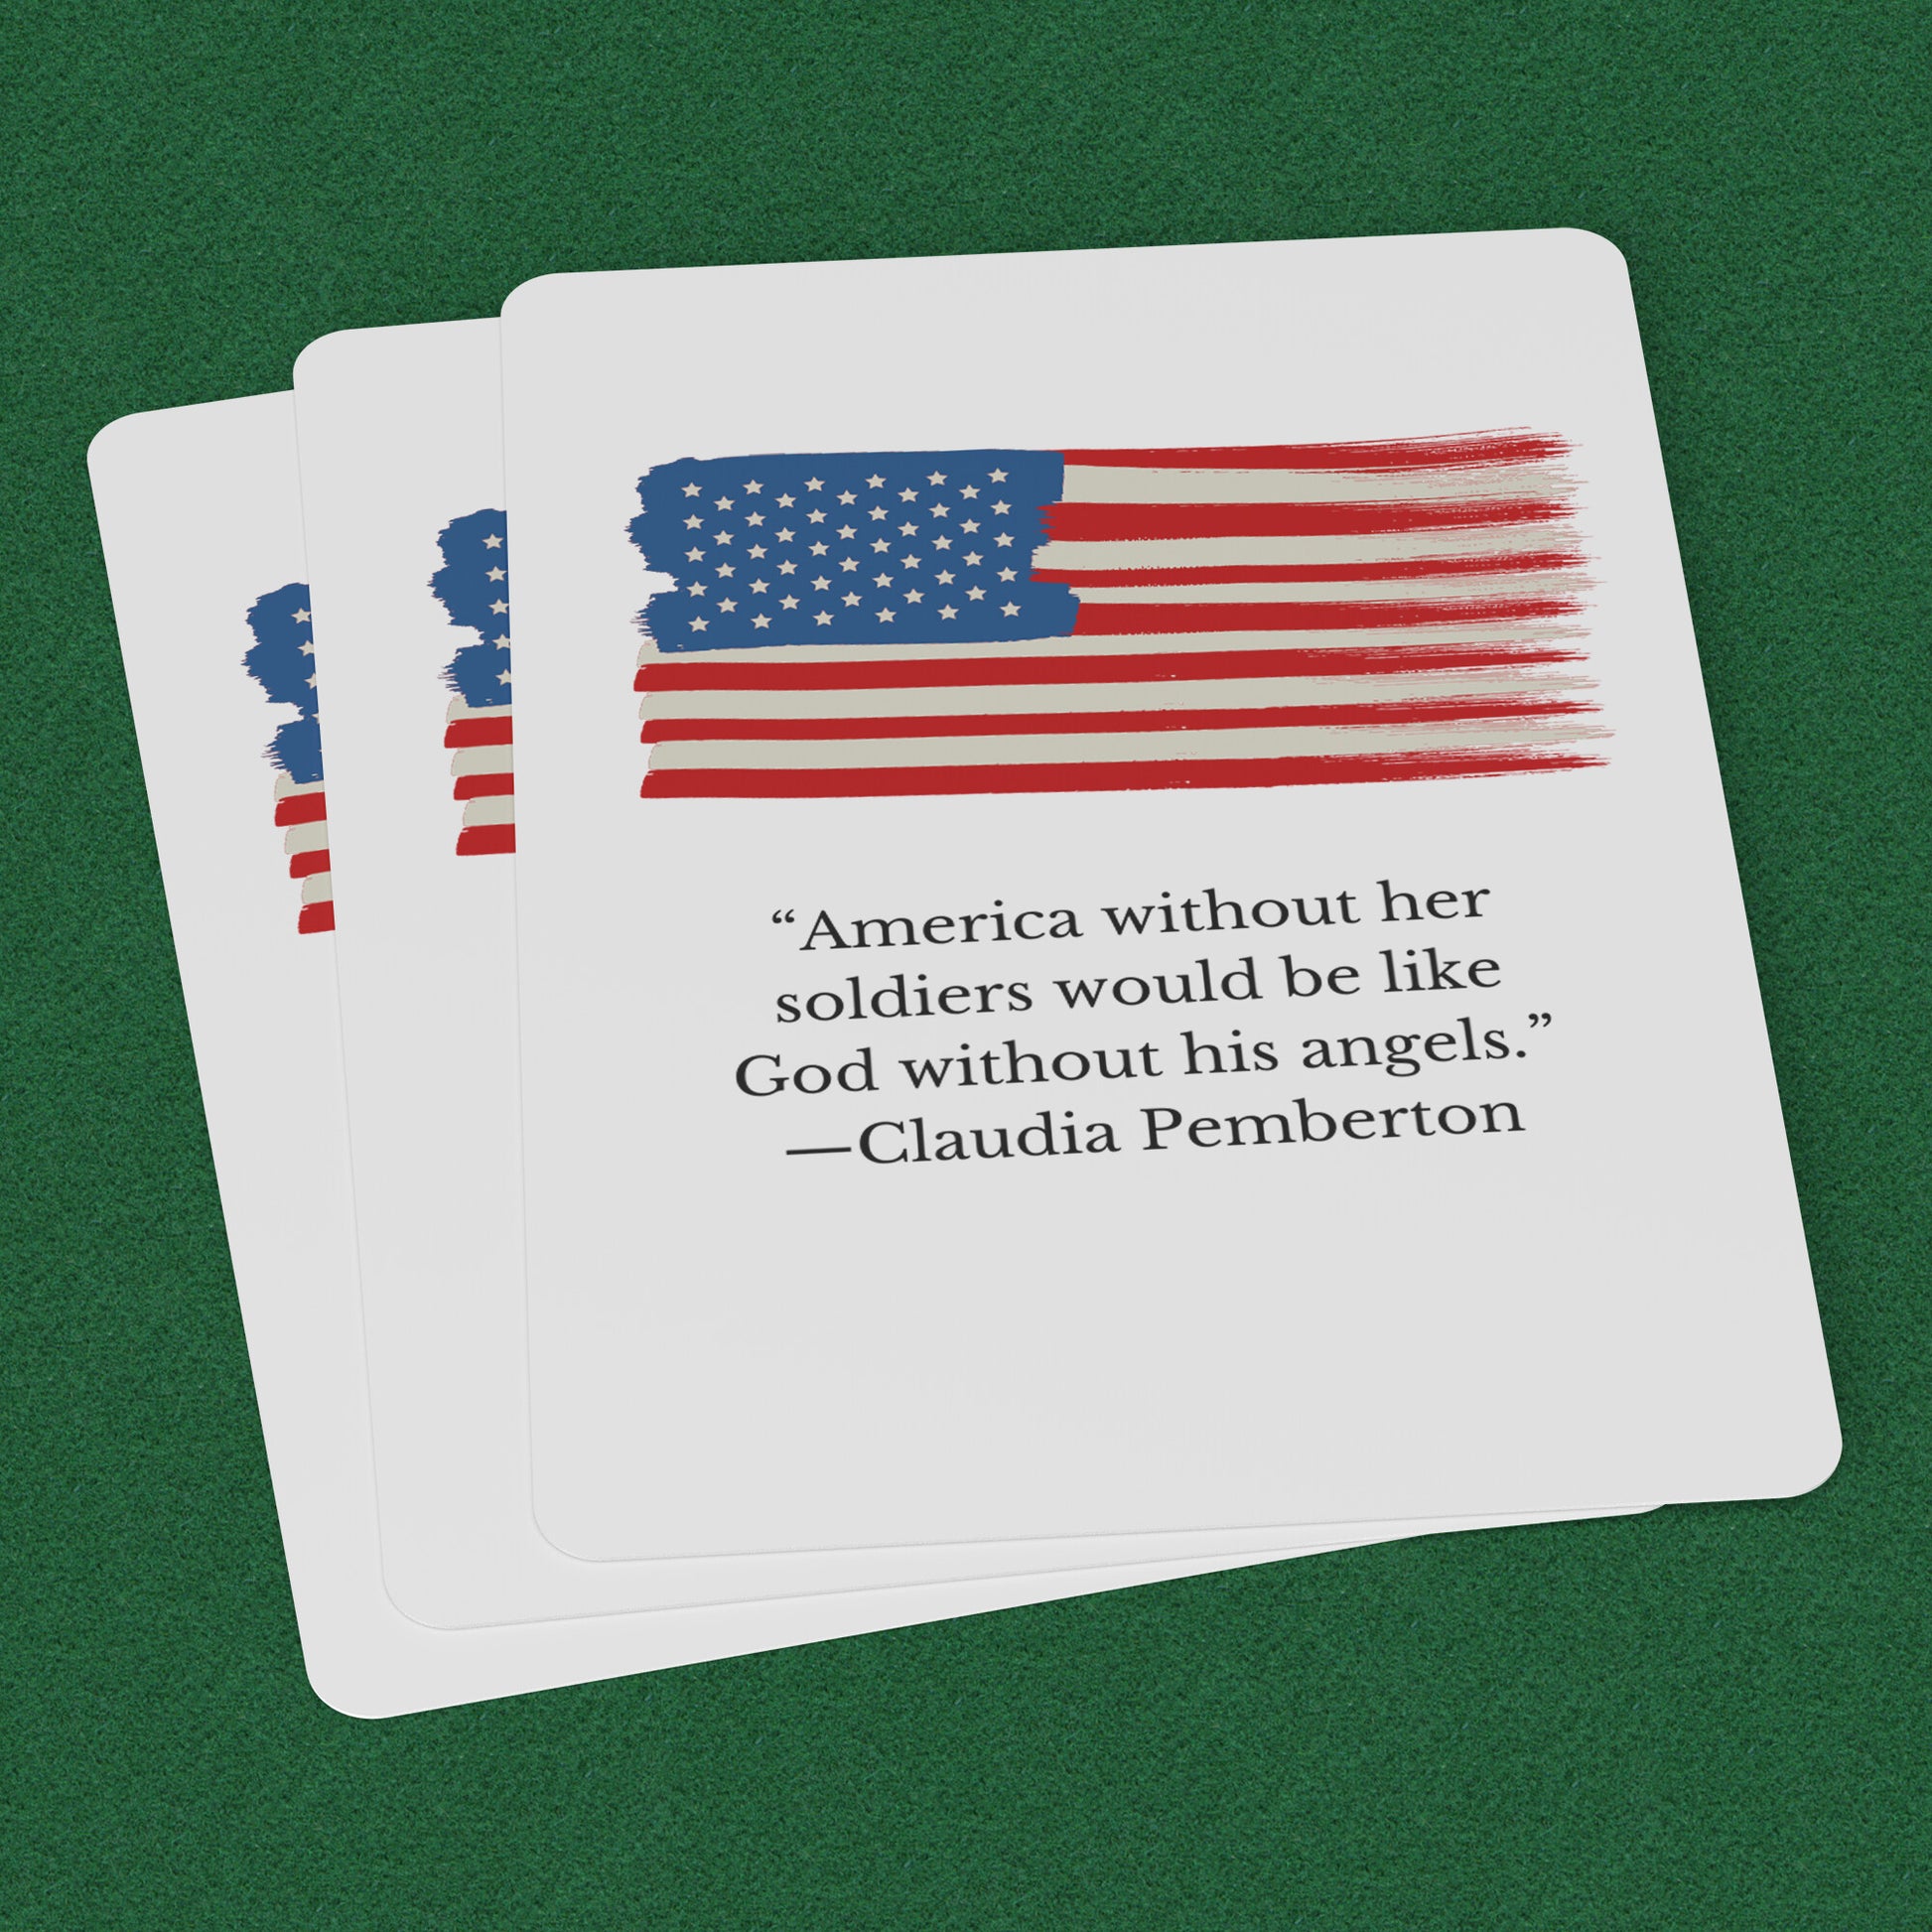 American Flag 52-Card Playing Deck - On the Go with Princess O